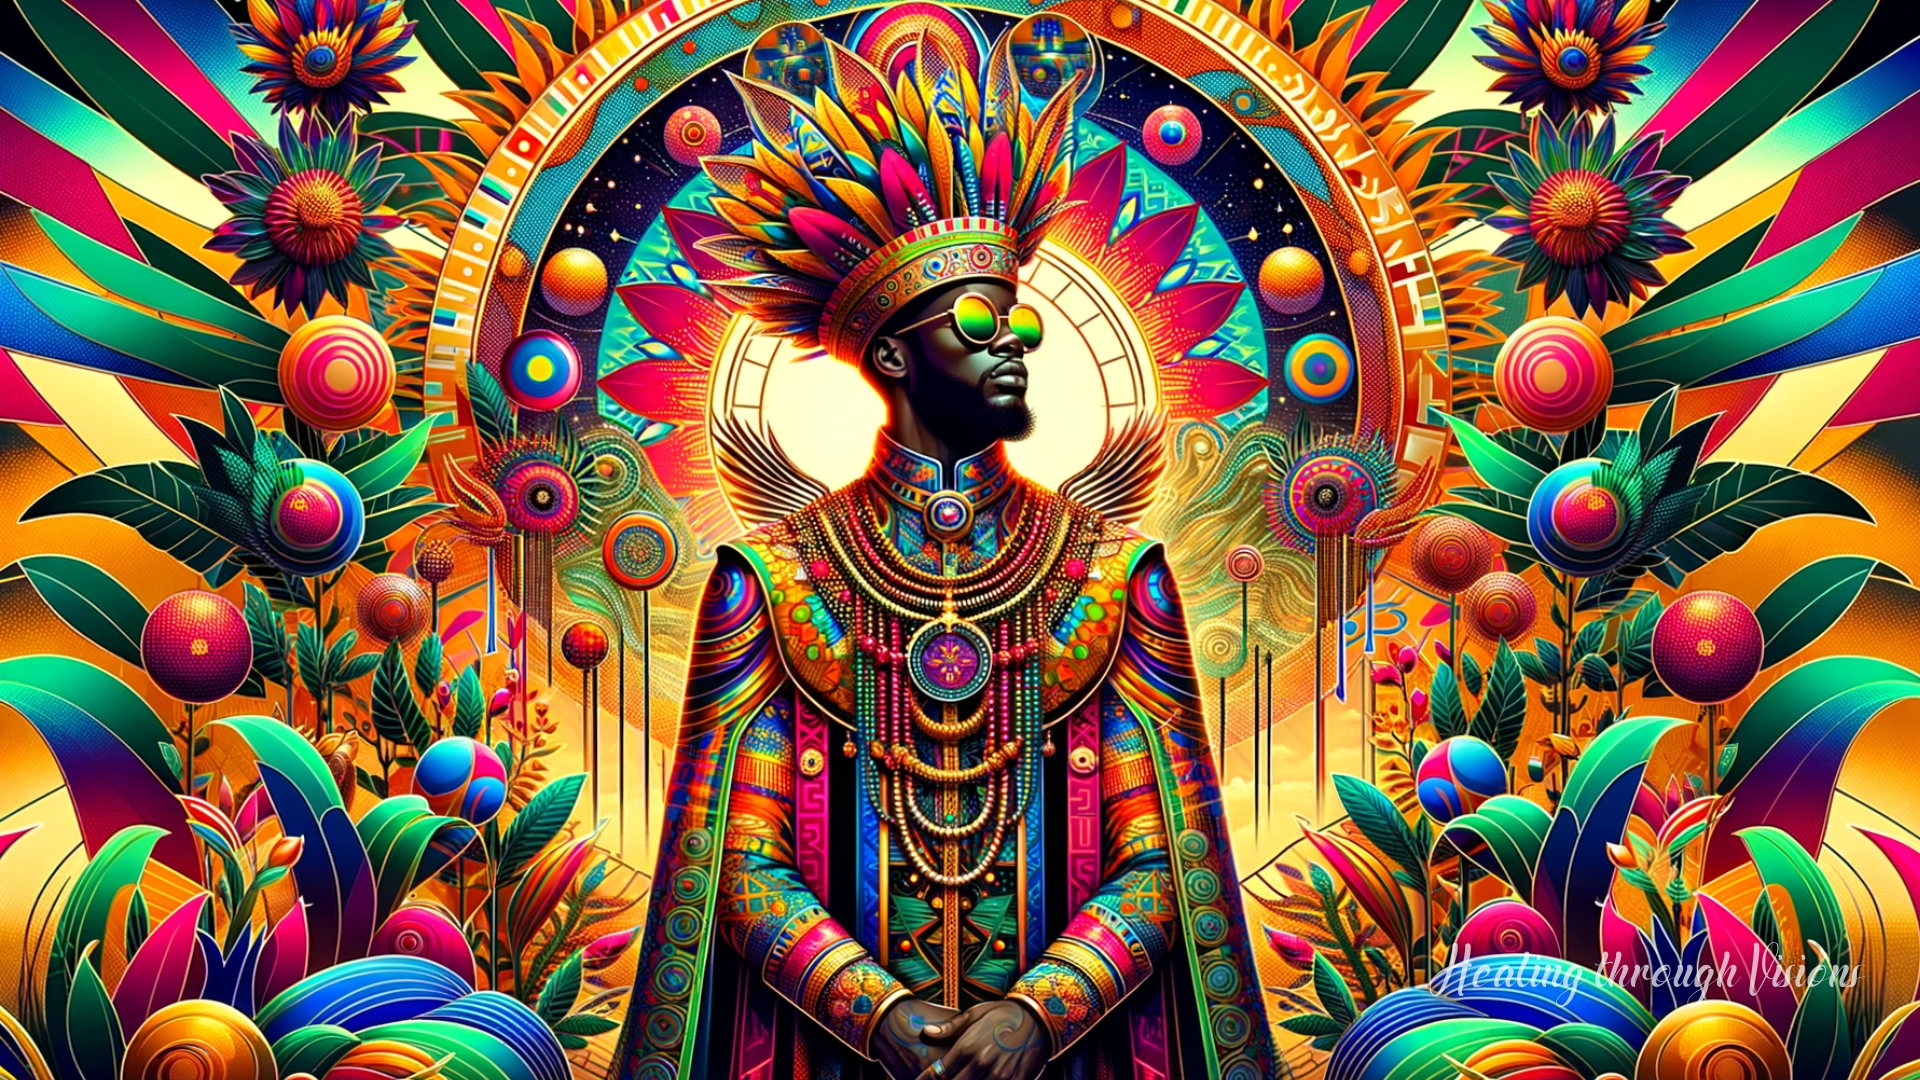 Healing through Visions - Afropunk Opulence - an Afropunk-inspired image featuring a majestic figure adorned in vibrant, colorful attire, with intricate patterns and symbols of wealth, standing confidently in a flourishing, futuristic landscape that merges tradition with modernity.